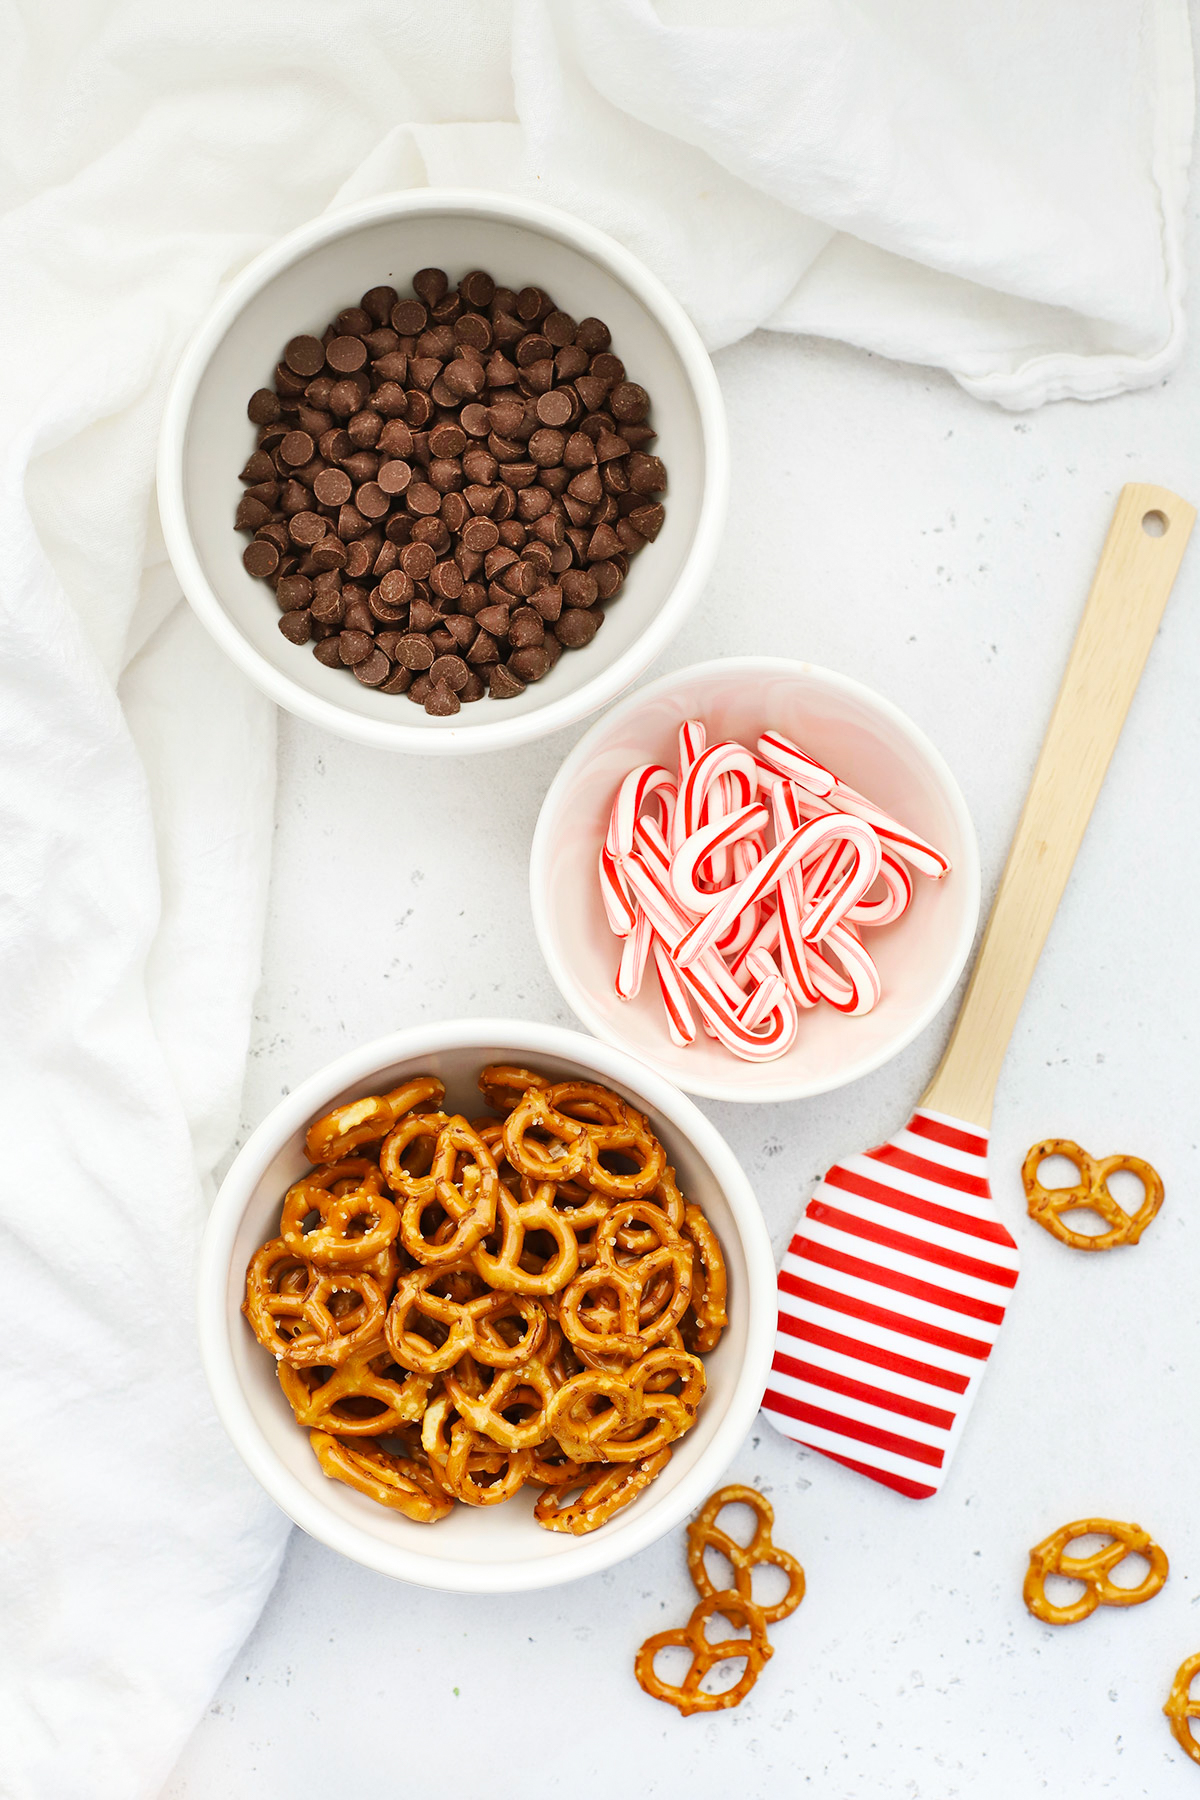 Overhead view of 3 bowls of ingredients for gluten-free chocolate peppermint pretzels--vegan chocolate chips, mini candy canes, and gluten-free pretzels.